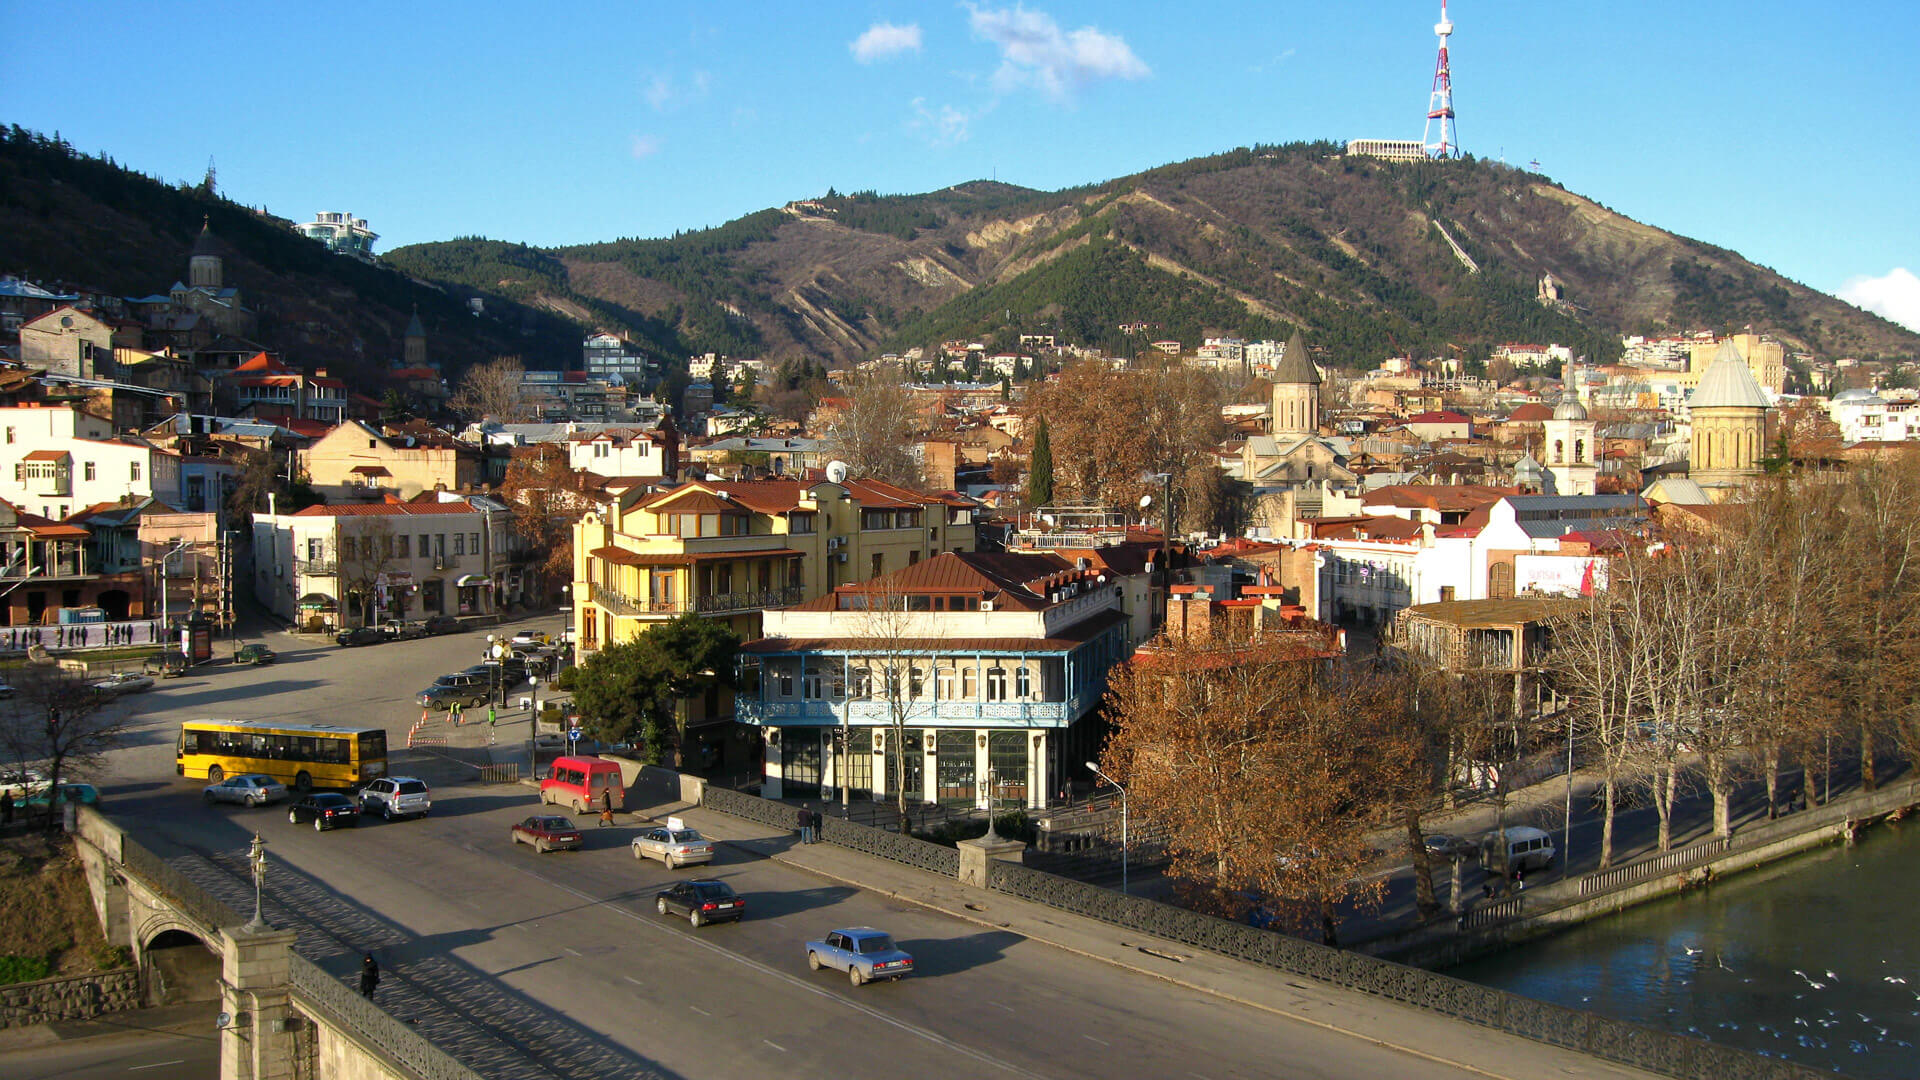 <p>The average cost for one person to spend a week in Tbilisi is around $205. Here are some average daily prices you can expect:</p> <ul> <li><strong>Meals</strong>: $8.03</li> <li><strong>Transportation</strong>: $6.20</li> <li><strong>Hotels</strong>: $25</li> </ul> <p>Georgia's capital city, Tbilisi, boasts cobblestone streets, historic churches and vibrant art scenes reminiscent of many European cities and town squares. The cost of living is low, making it an affordable destination for travelers. Enjoy the local cuisine, visit the ancient Narikala Fortress and relax in the city's famous sulfur baths.</p> <p><strong>Be Aware: <a href="https://www.gobankingrates.com/saving-money/travel/dave-ramsey-vacation-splurges-that-are-waste-of-money/?utm_term=related_link_3&utm_campaign=1271998&utm_source=msn.com&utm_content=5&utm_medium=rss" rel="">Dave Ramsey: 7 Vacation Splurges That are a Waste of Money</a></strong></p> <p><strong>Discover More: <a href="https://www.gobankingrates.com/saving-money/travel/expensive-destinations-that-will-be-cheaper-in-2024/?utm_term=related_link_4&utm_campaign=1271998&utm_source=msn.com&utm_content=6&utm_medium=rss" rel="">11 Expensive Vacation Destinations That Will Be Cheaper in 2024</a></strong></p>